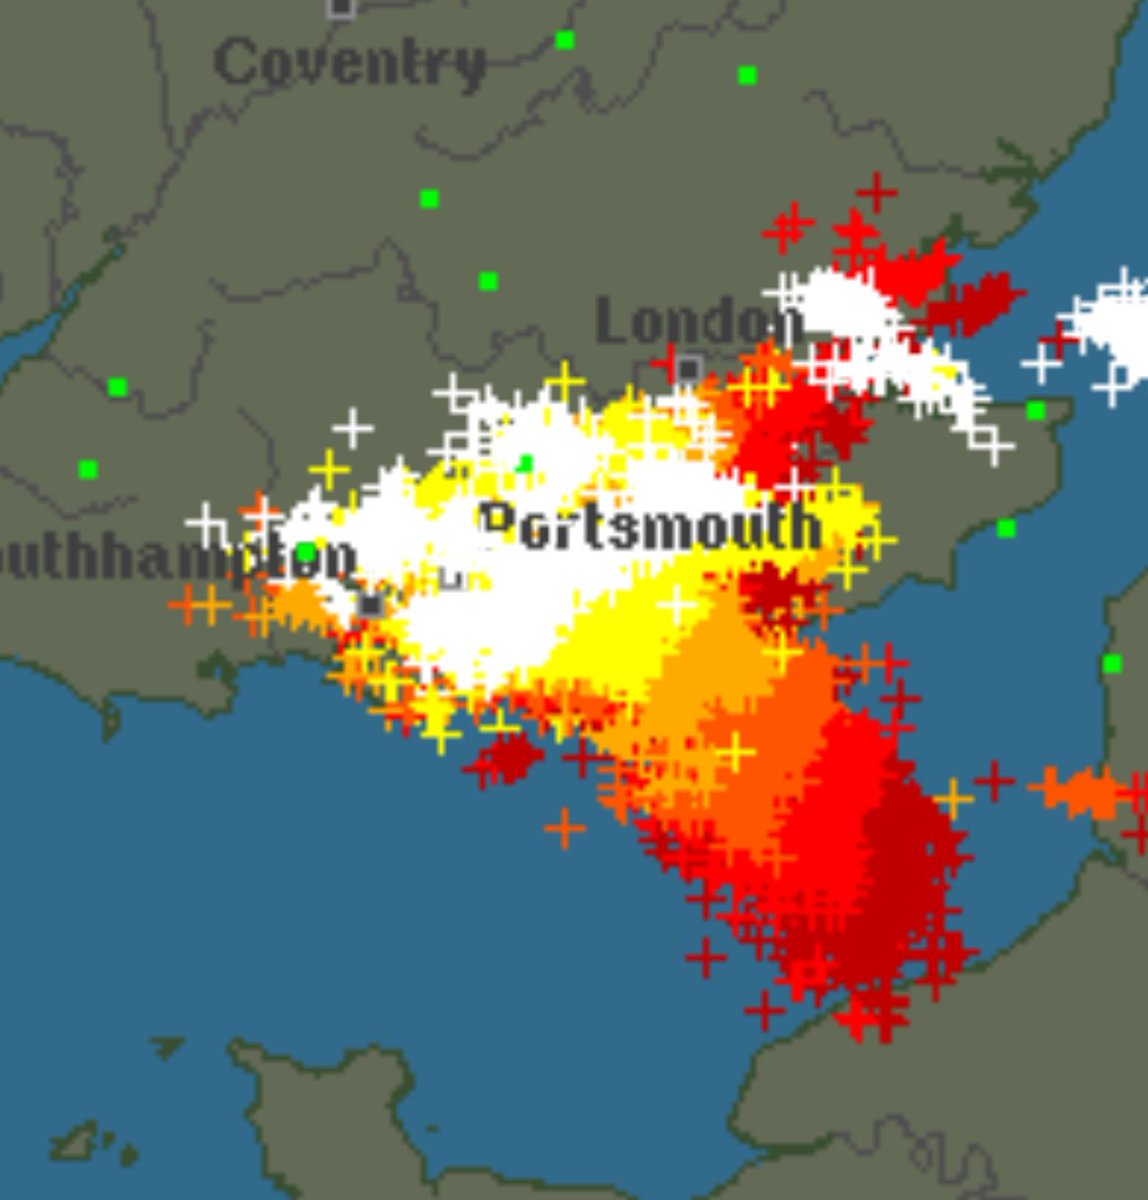 “It’ll be a dry night in the North and Wales this evening, temperatures around average, while the South East can expect a spell of What The Holy Bejeezus Fuck spreading across the region from around 3am” #thunderstorms